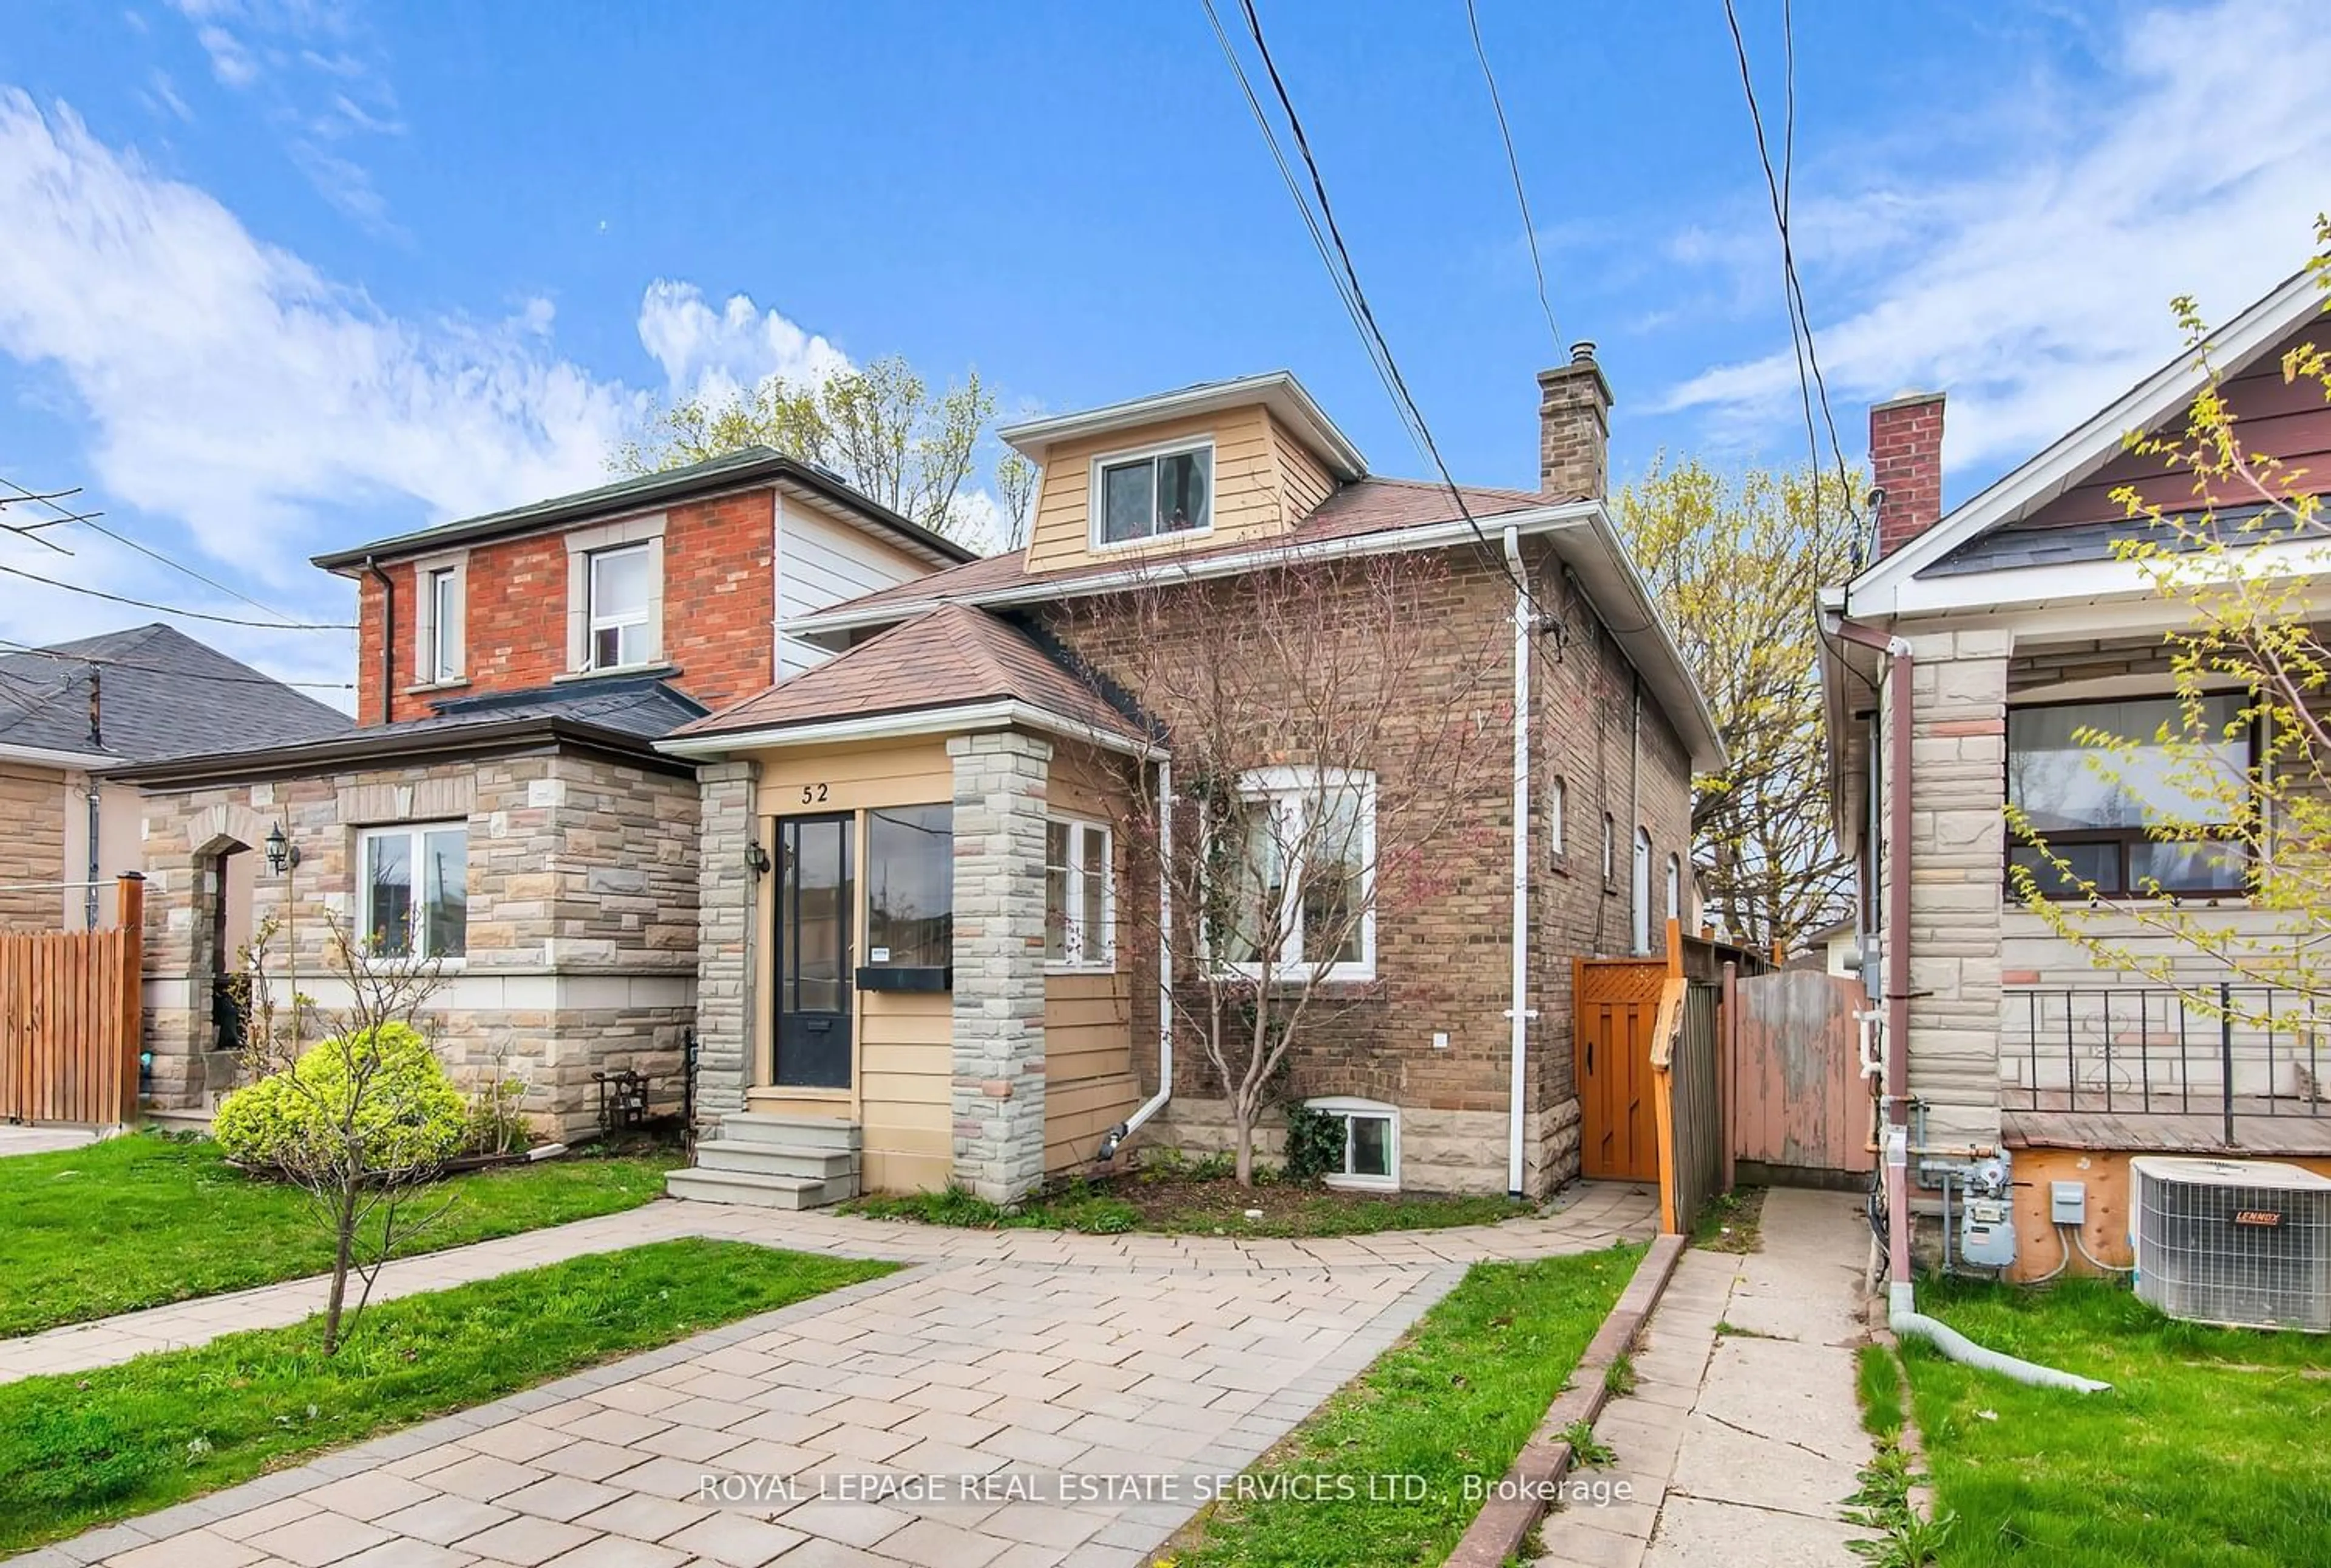 Home with brick exterior material for 52 Bicknell Ave, Toronto Ontario M6M 4G5